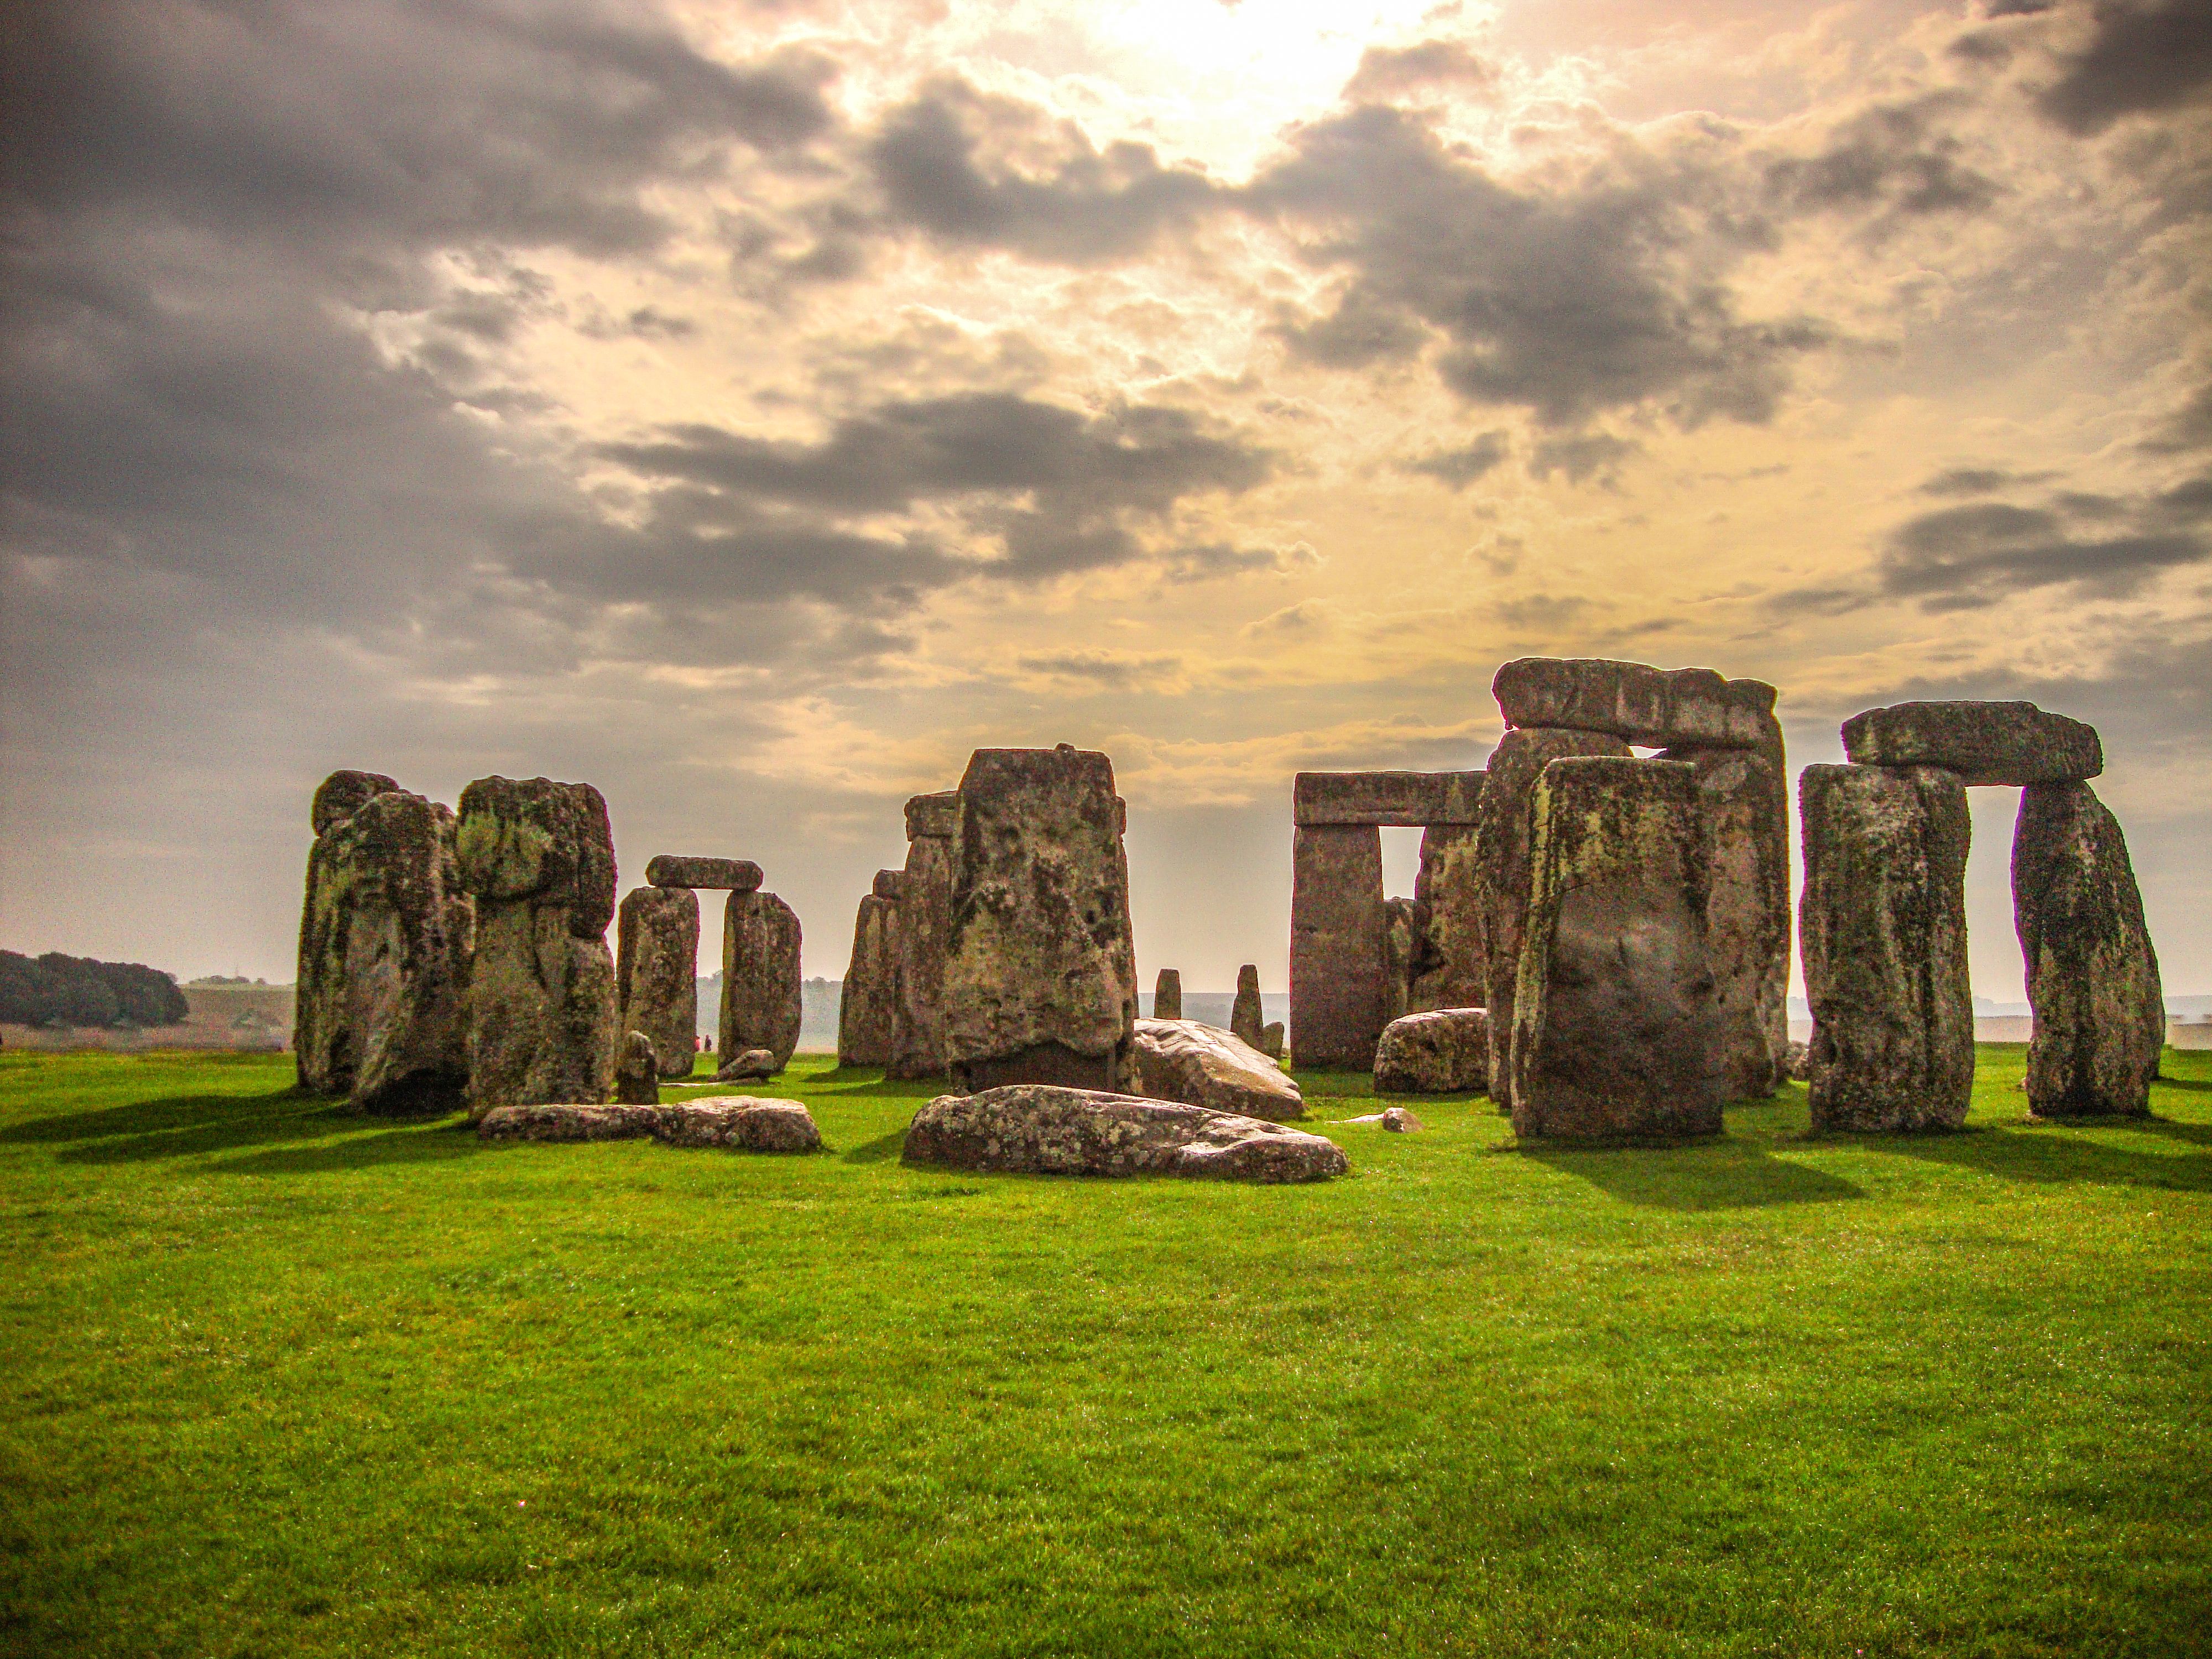 What is it that makes Stonehenge's stone circles so magical